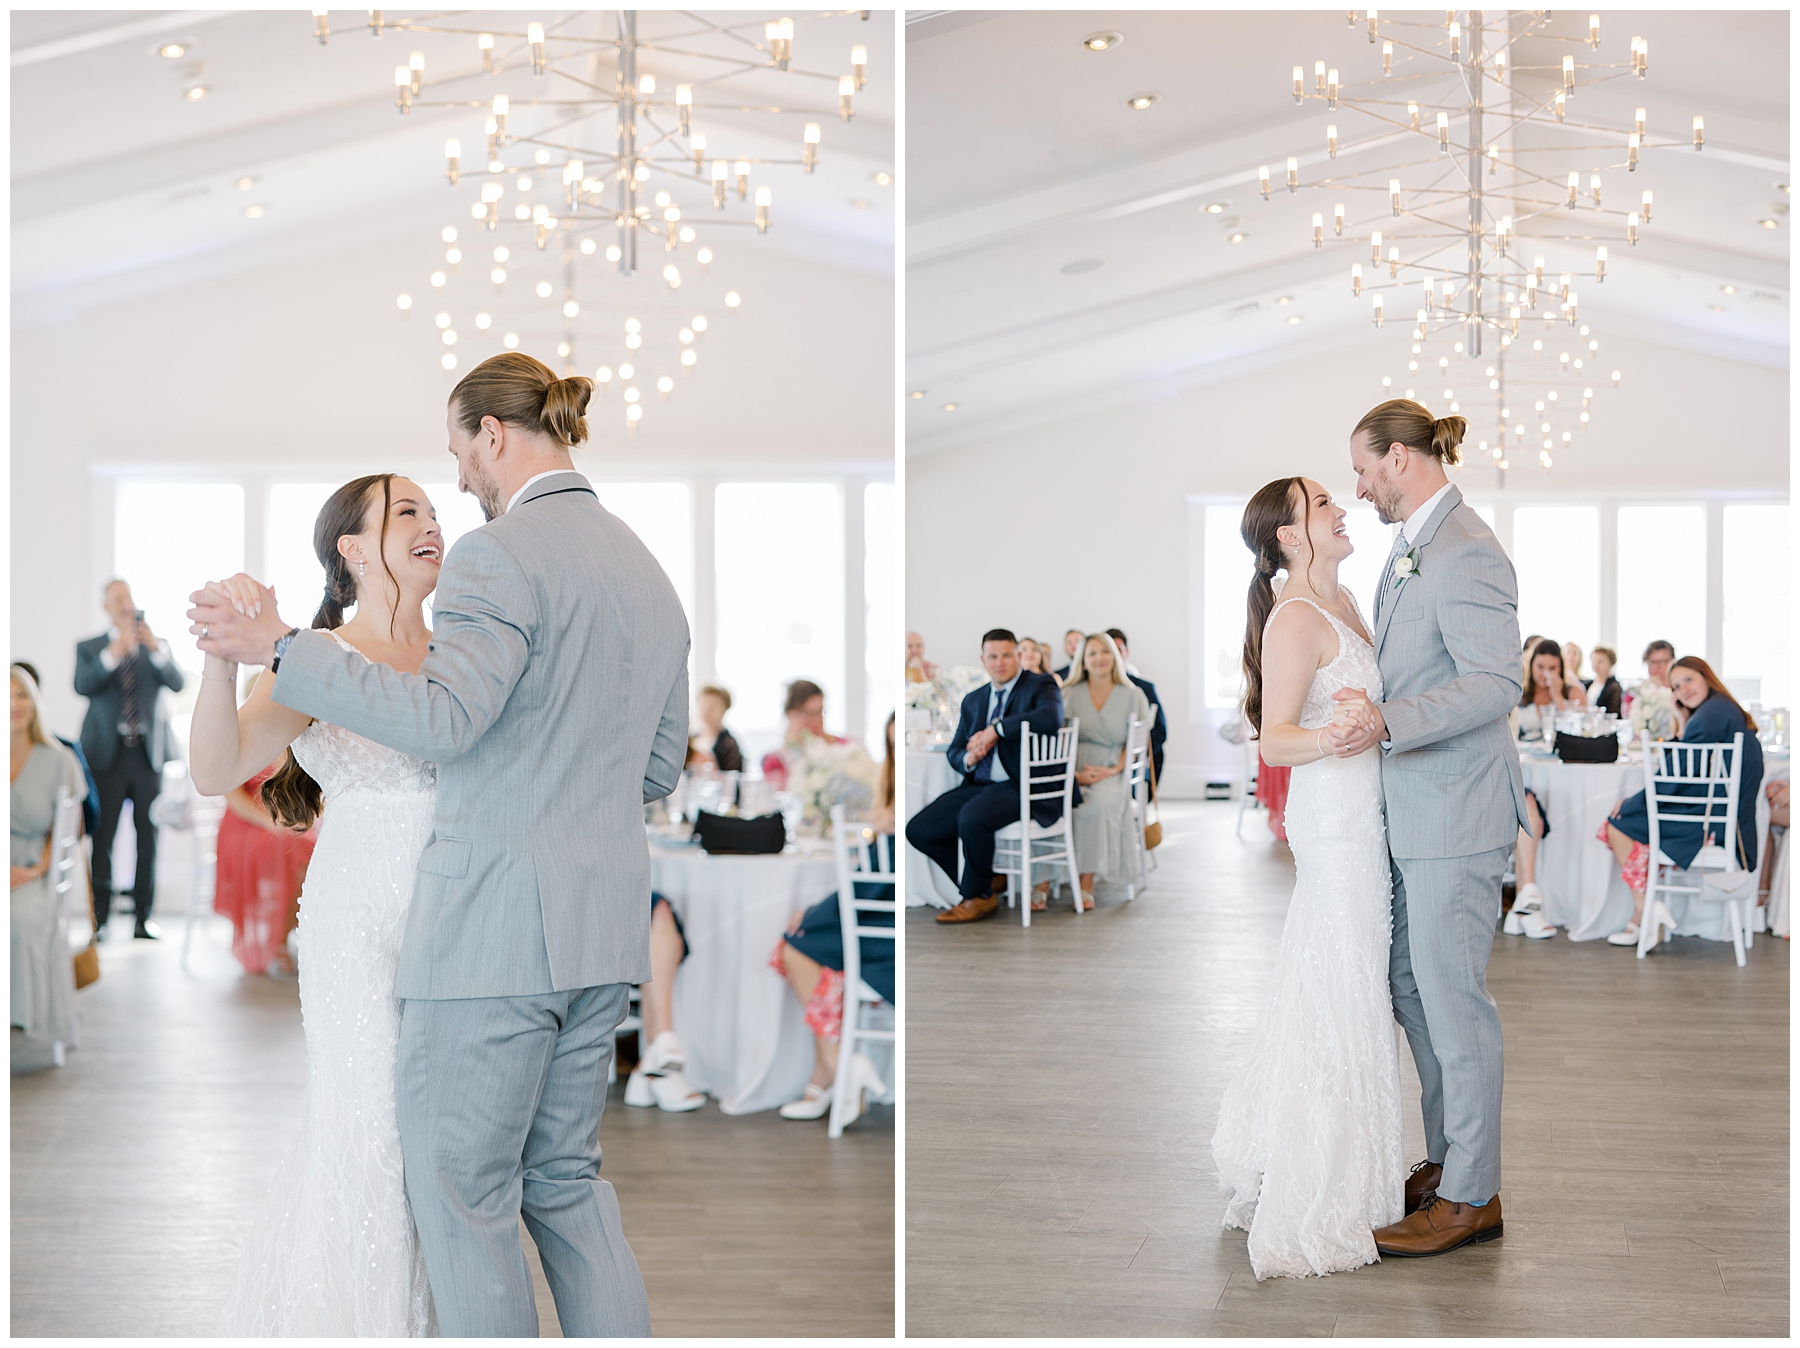 newlyweds share first dance togehter